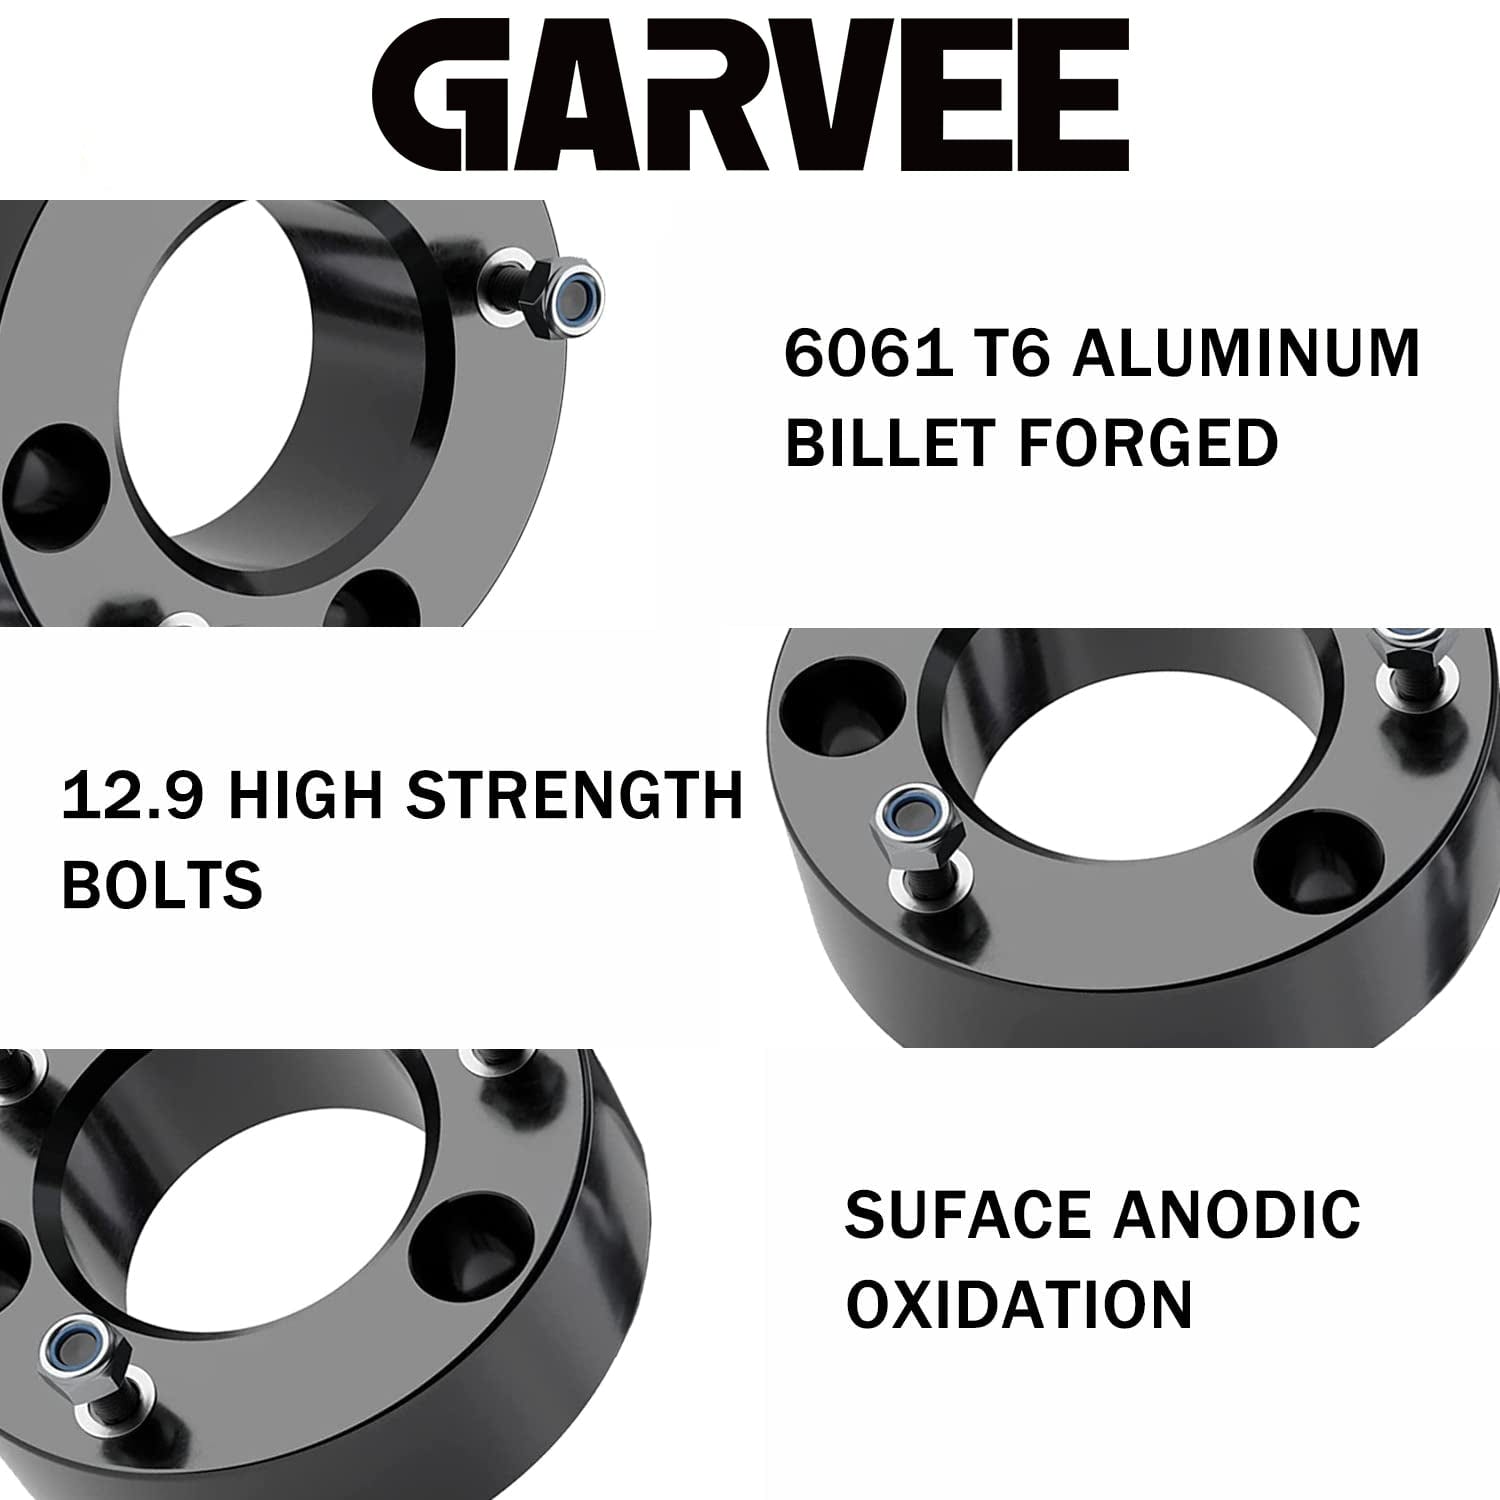 2.0 Inch Front Leveling Kit for 2007-2021 Silverado 1500 2WD/4WD - GARVEE